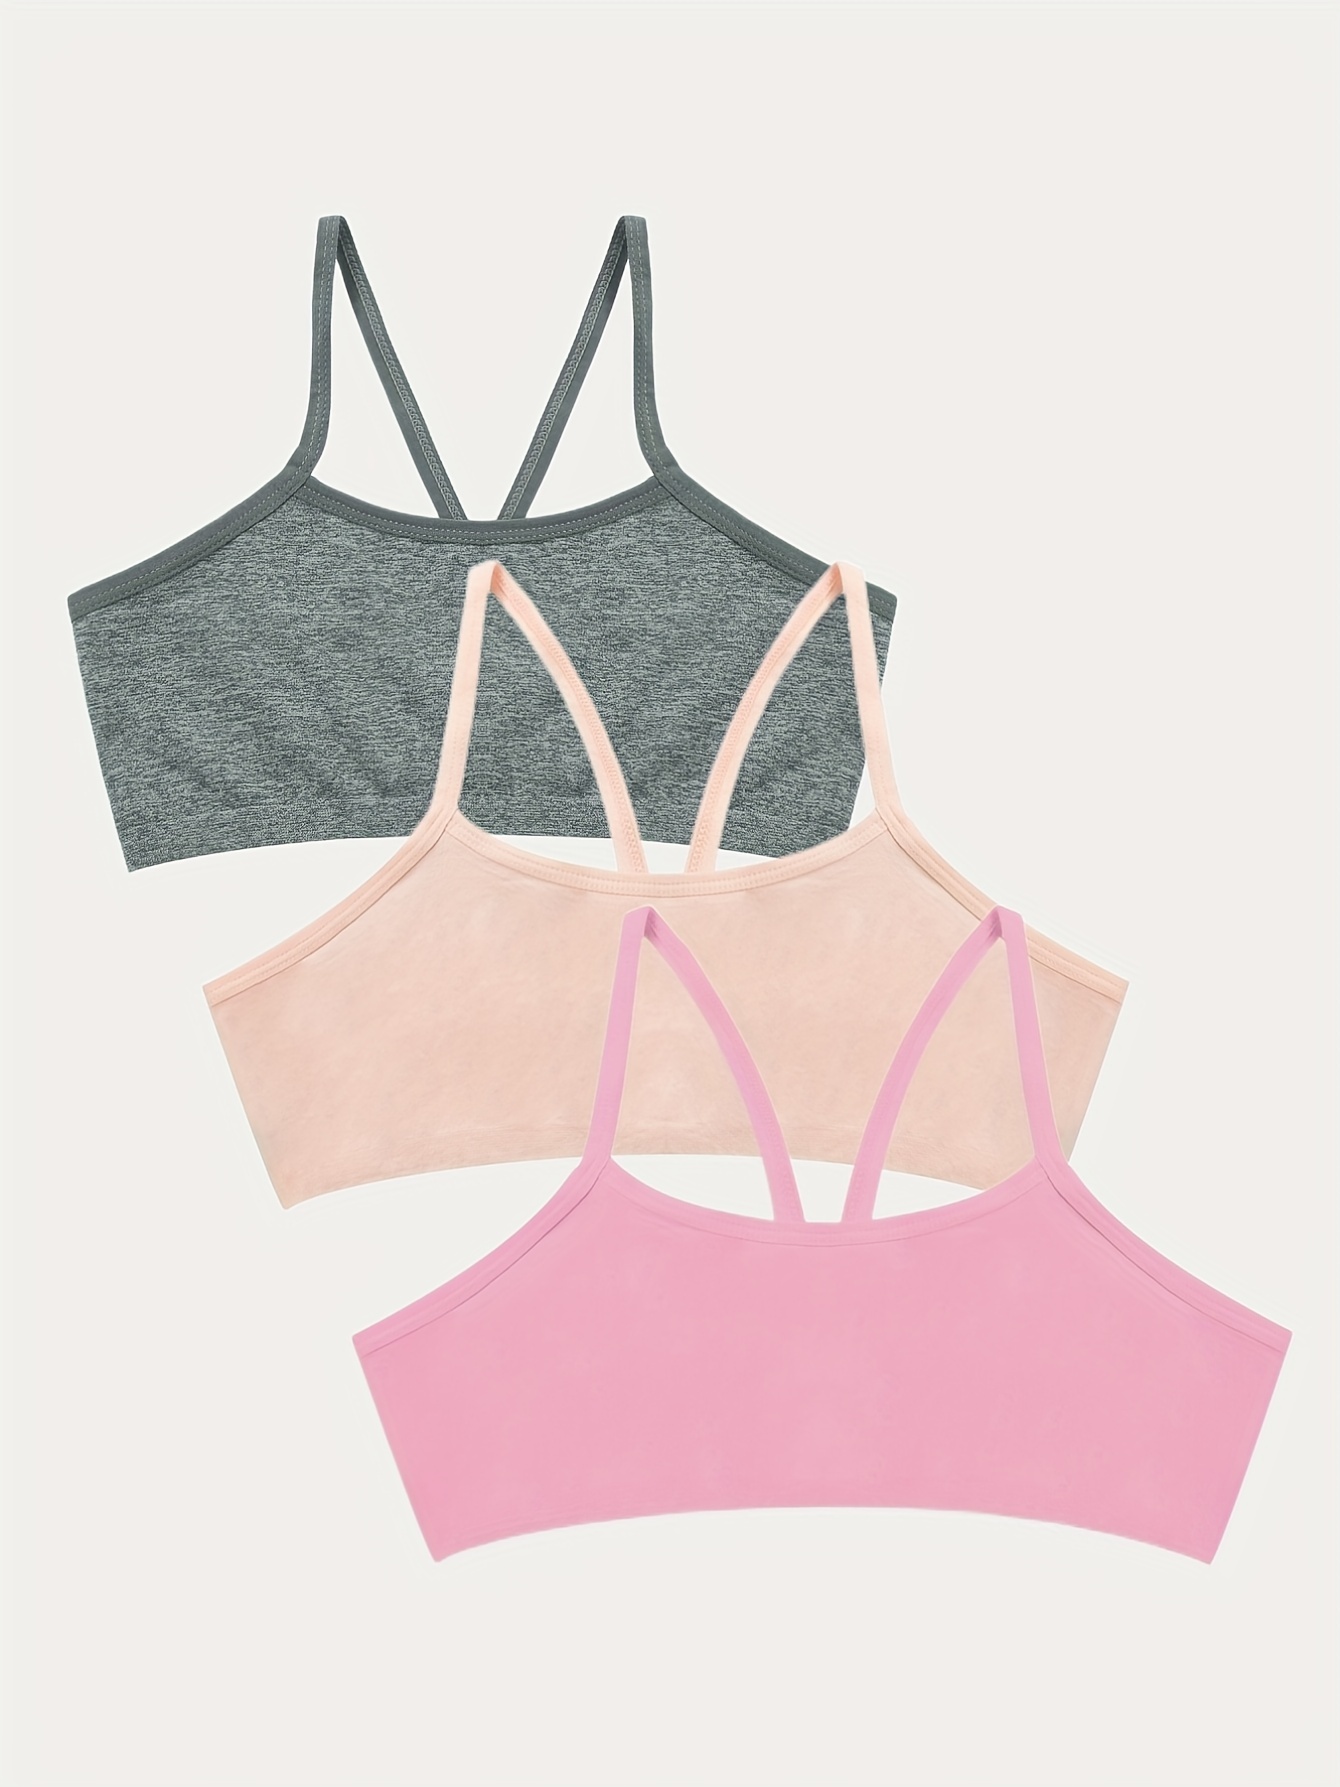 Comfortable Stylish girls training bra pictures Deals 